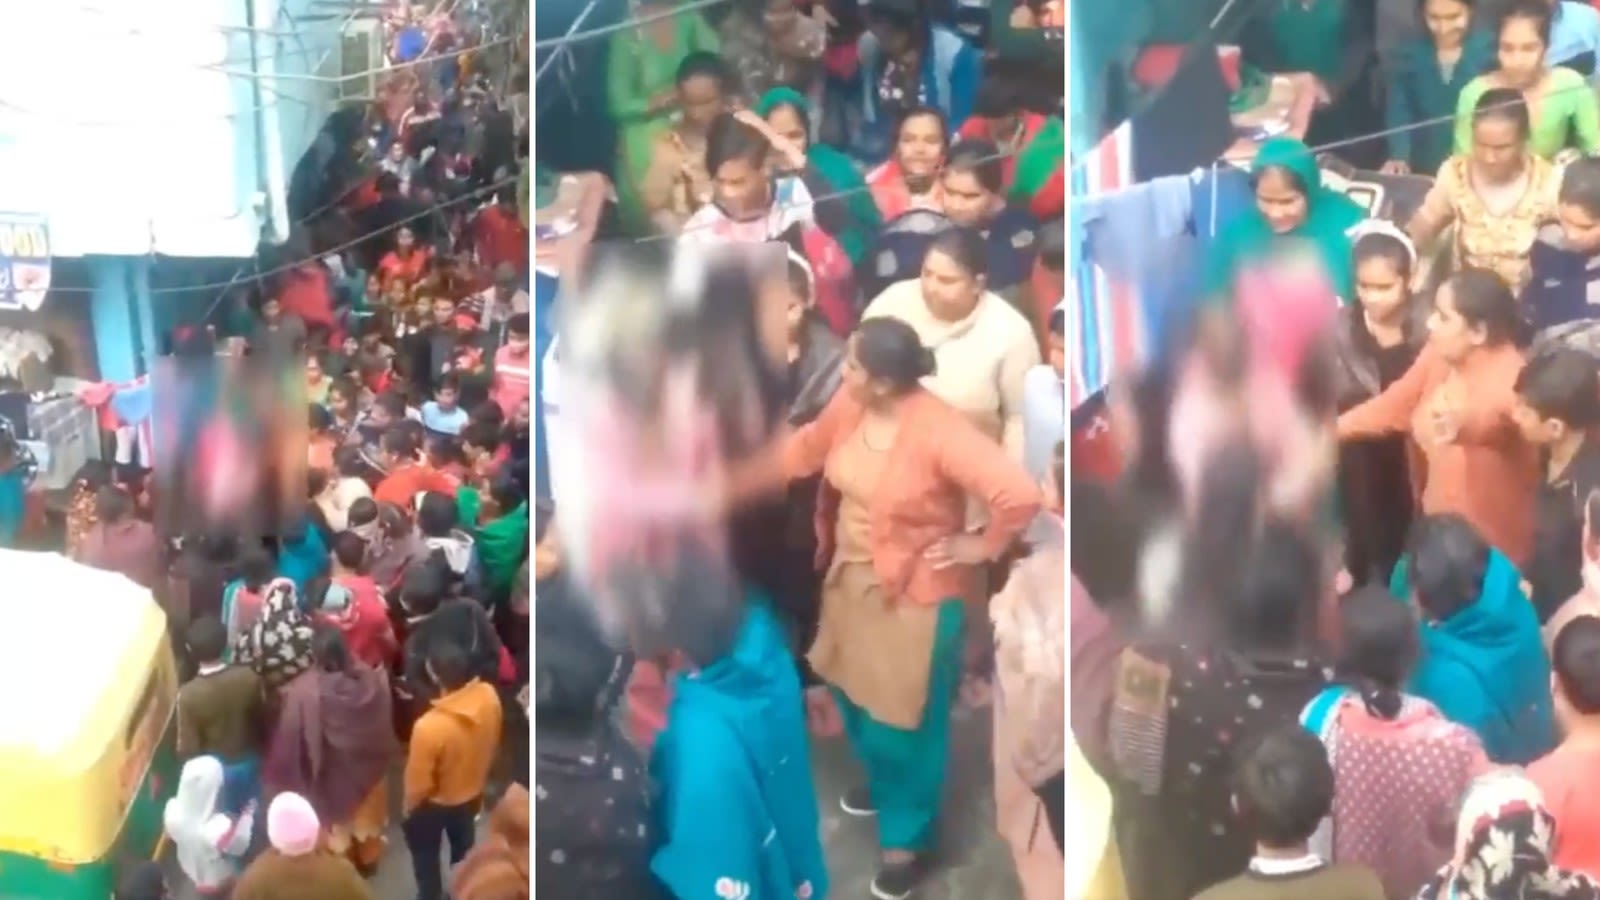 Brother Sister First Time Rape Download Video - Some people in a cheering crowd called for her to be raped. Many were women  | CNN